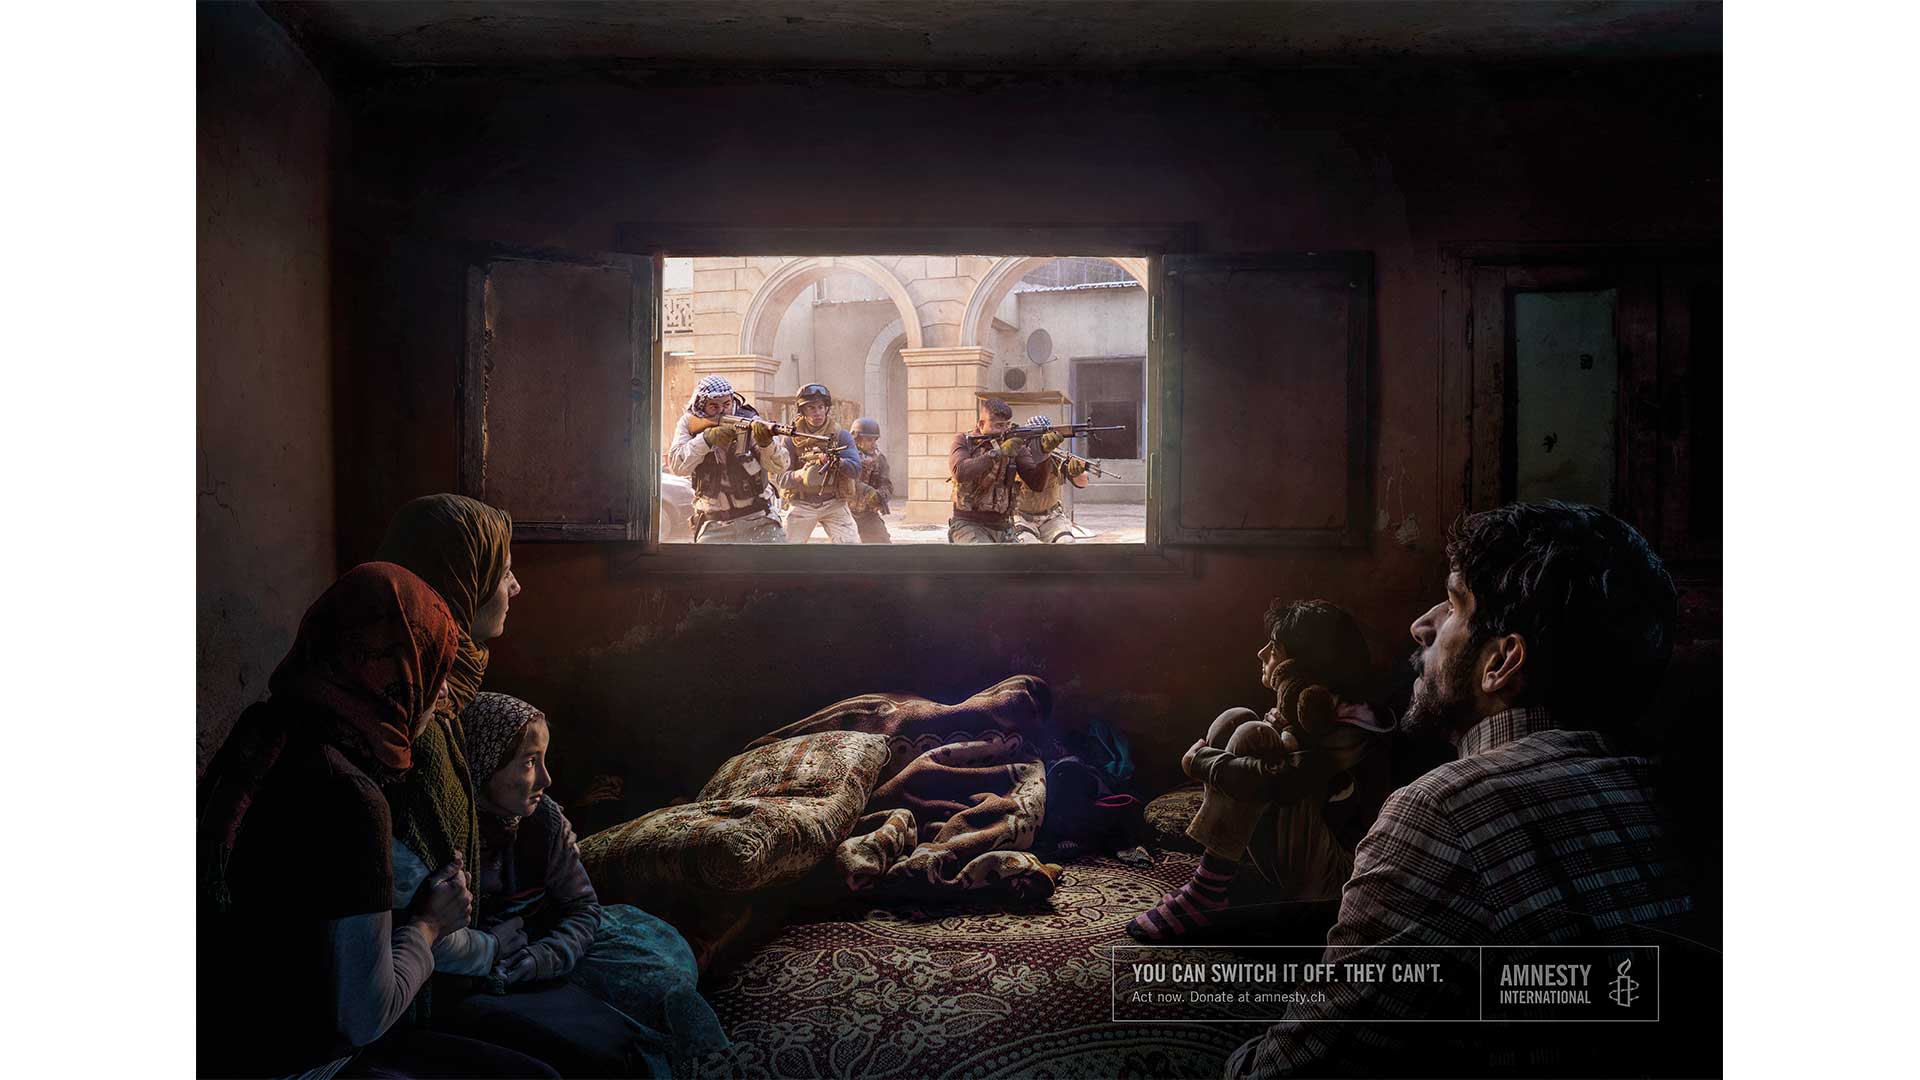 A family looking out of the window of their home with soldiers fighting outside